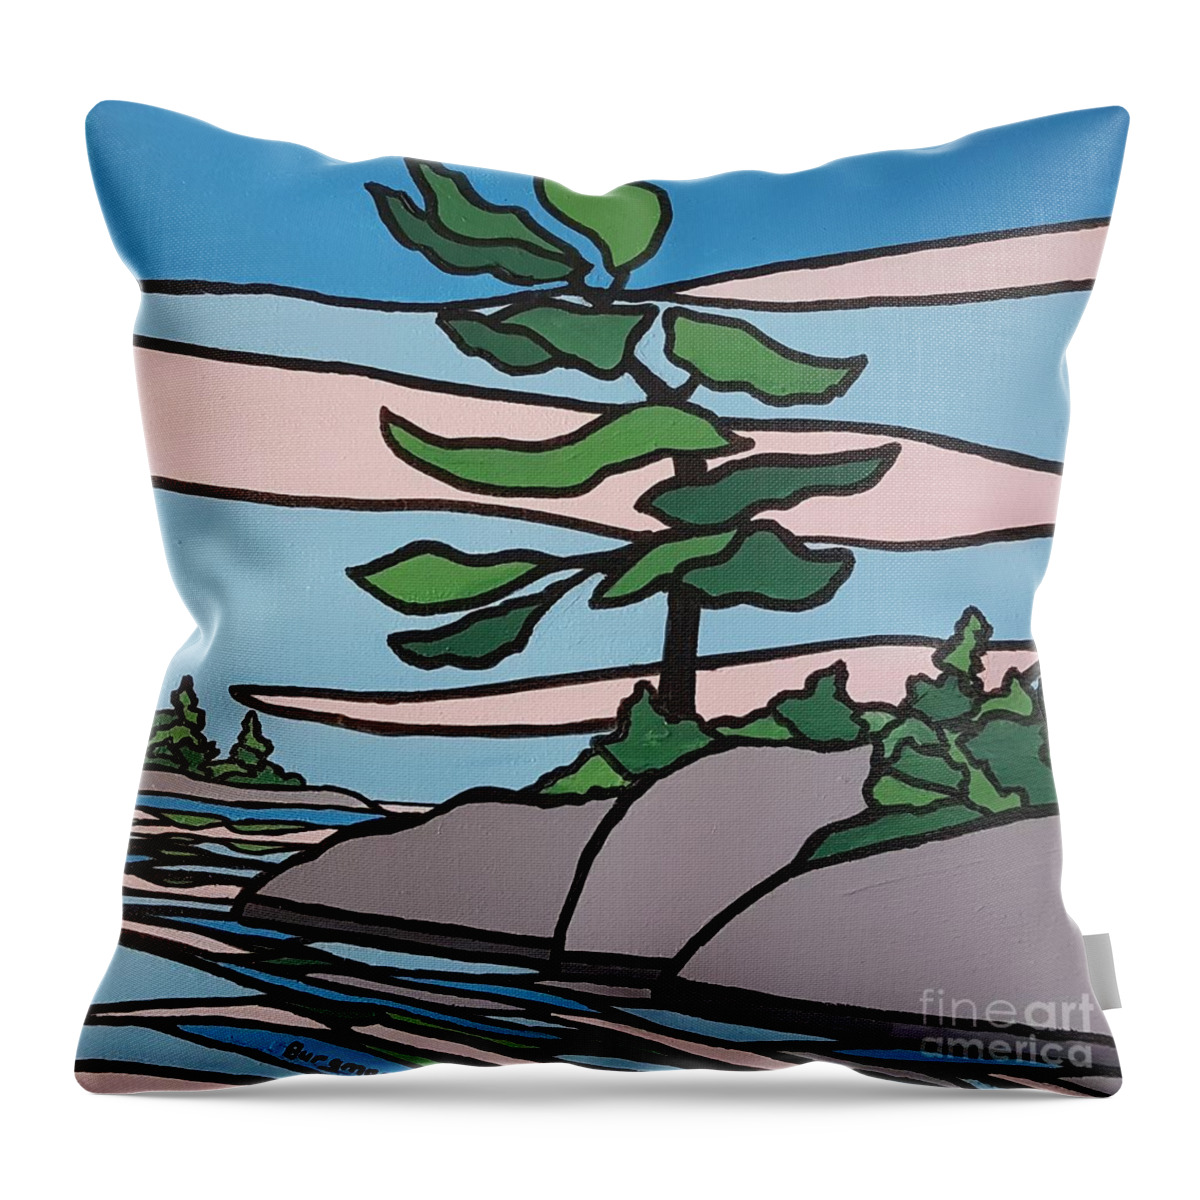 Landscape Throw Pillow featuring the painting Bay Calm by Petra Burgmann